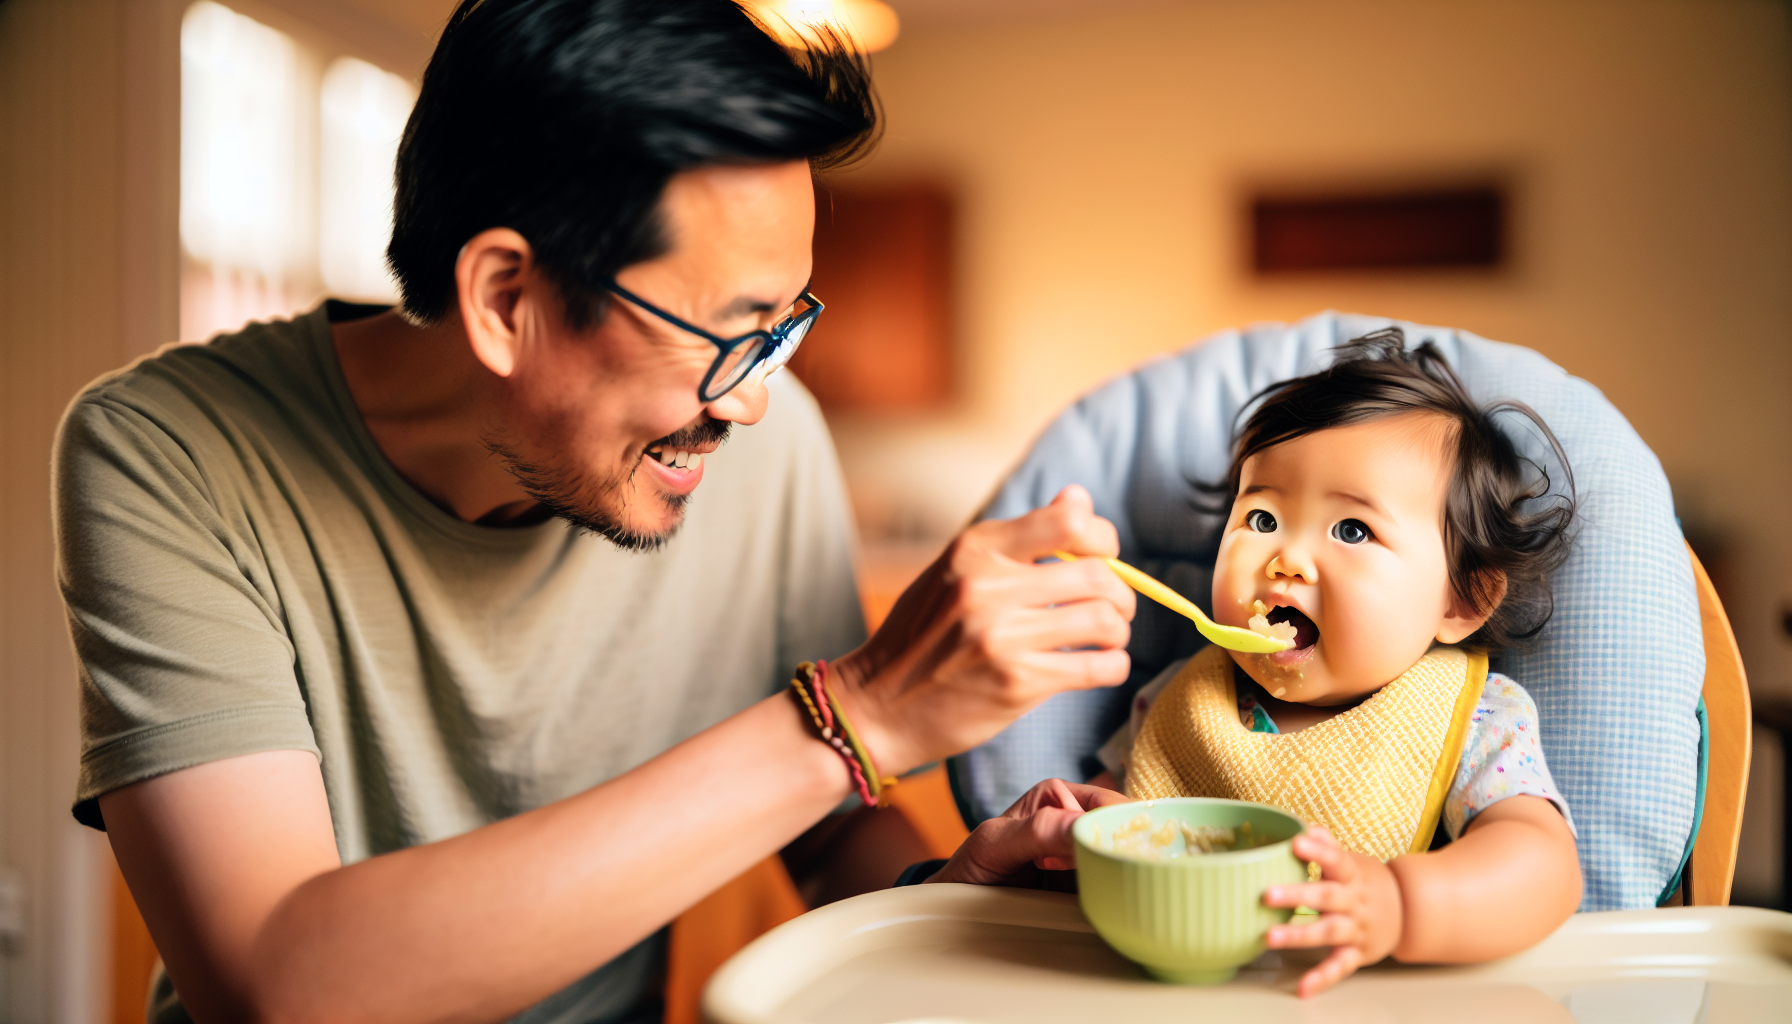 Parent feeding baby with organic baby food